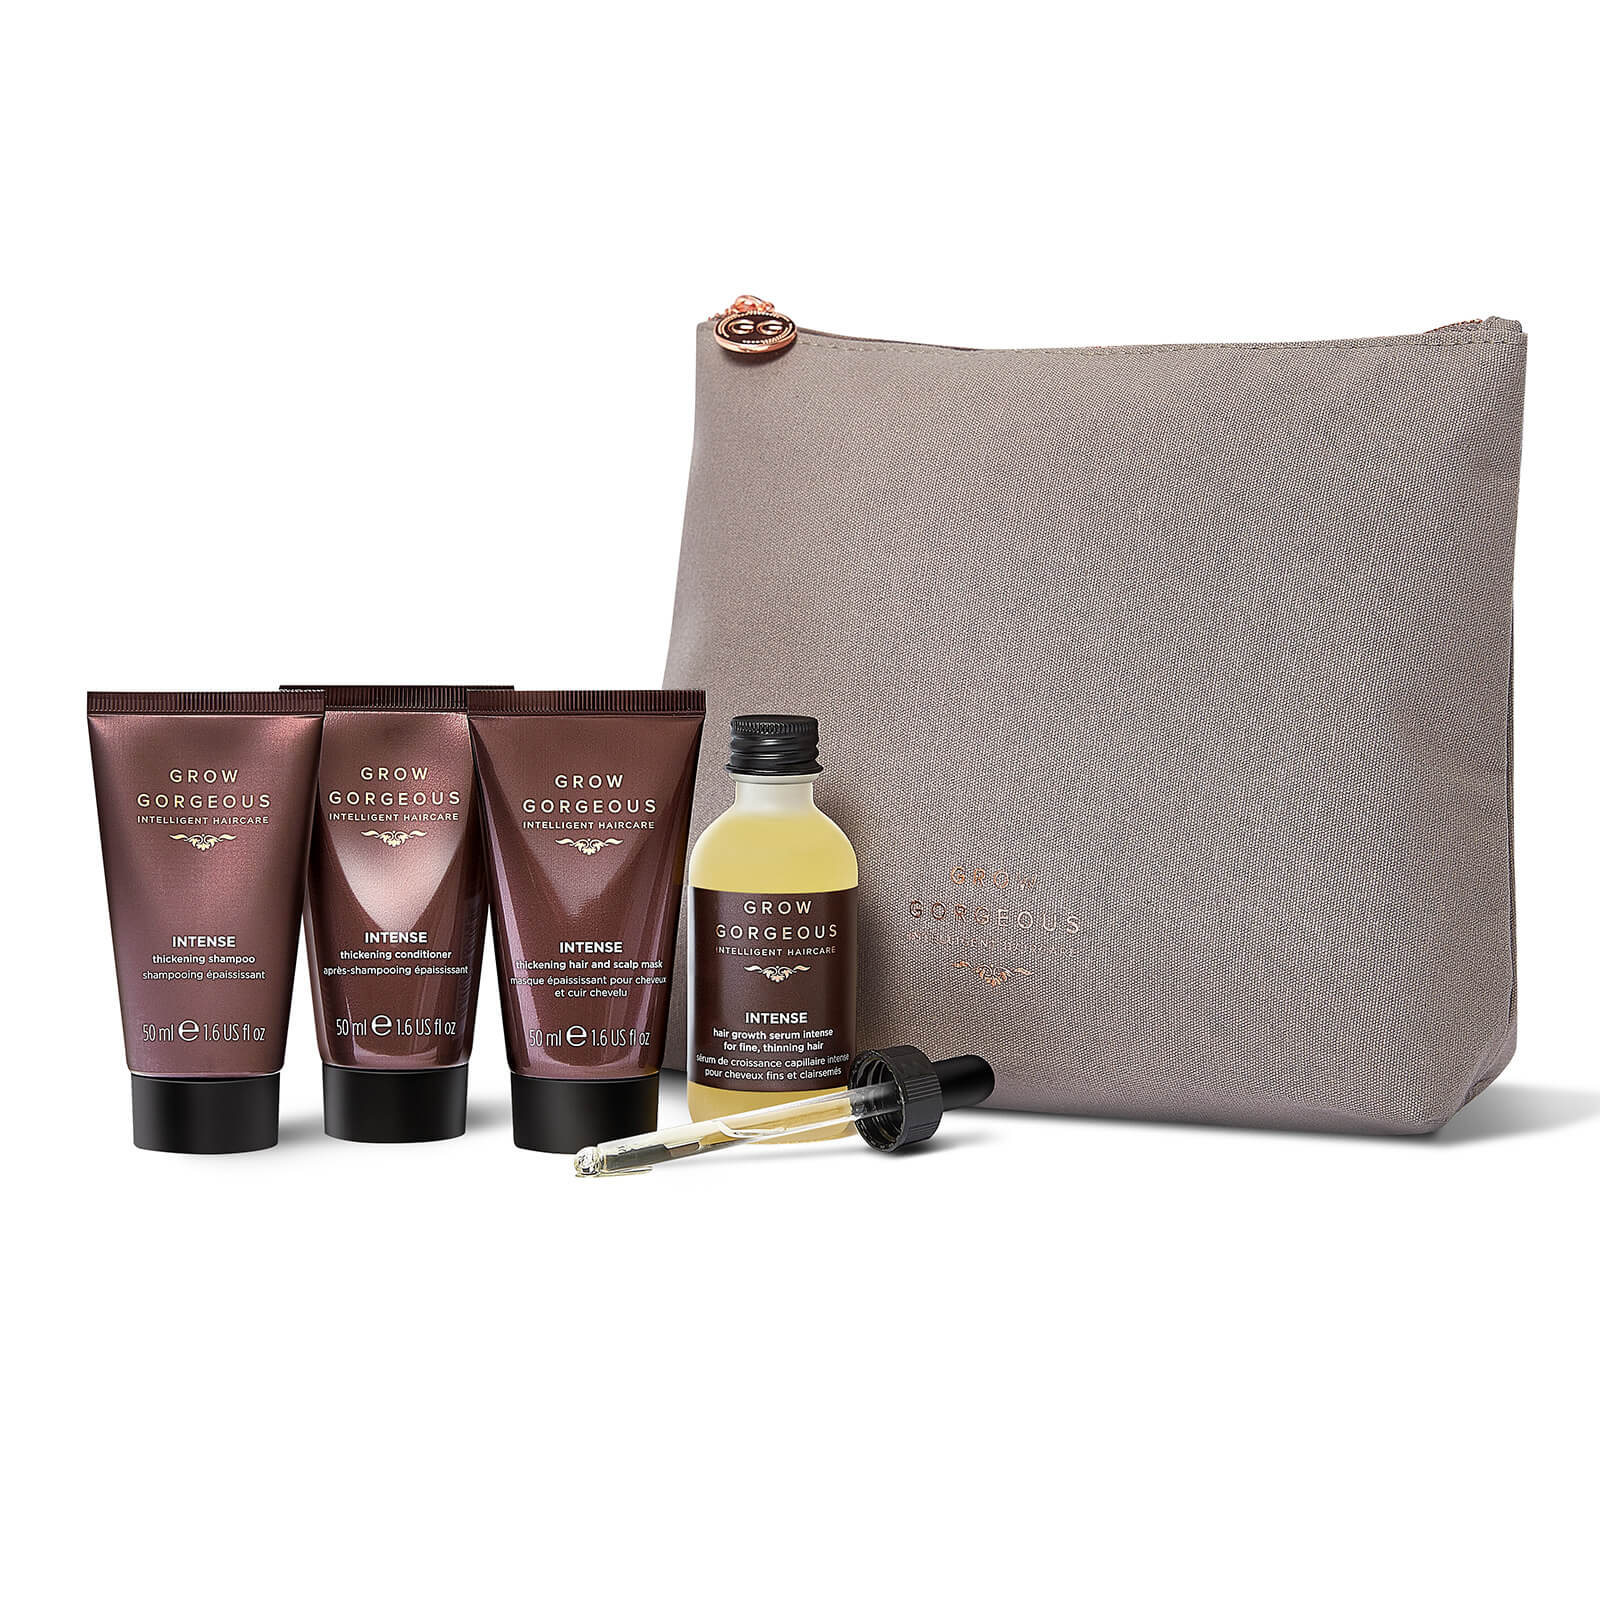 Grow Gorgeous Intense Growth Discovery Kit  (Worth £58.00)